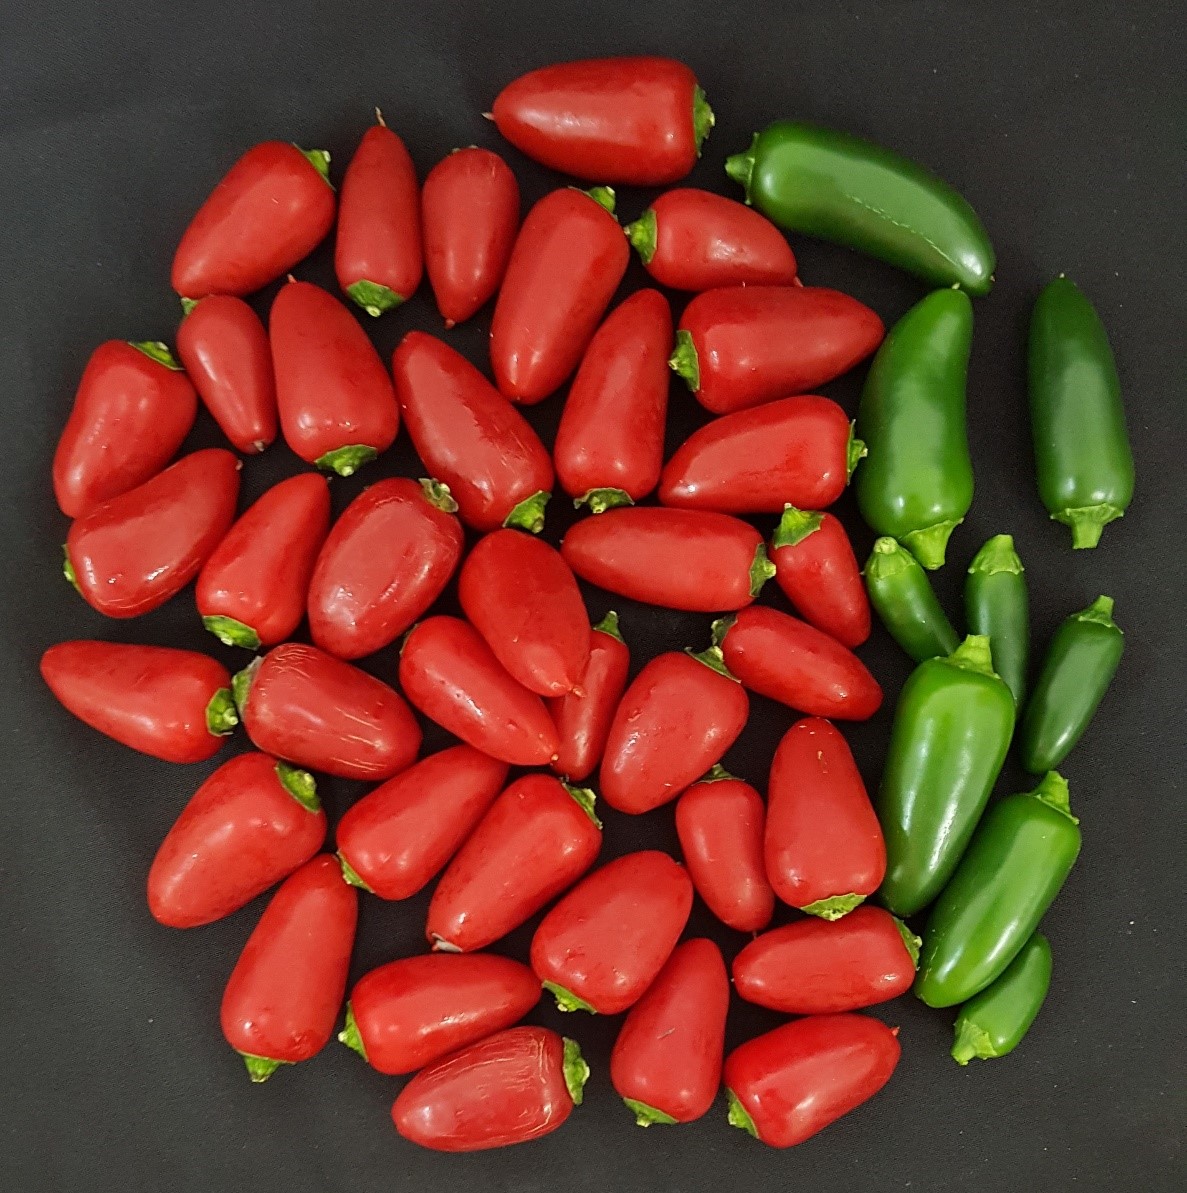 This image shows Jalapeño peppers (a cultivated variety of Capsicum annuum) CREDIT Emmanuel Rezende Naves